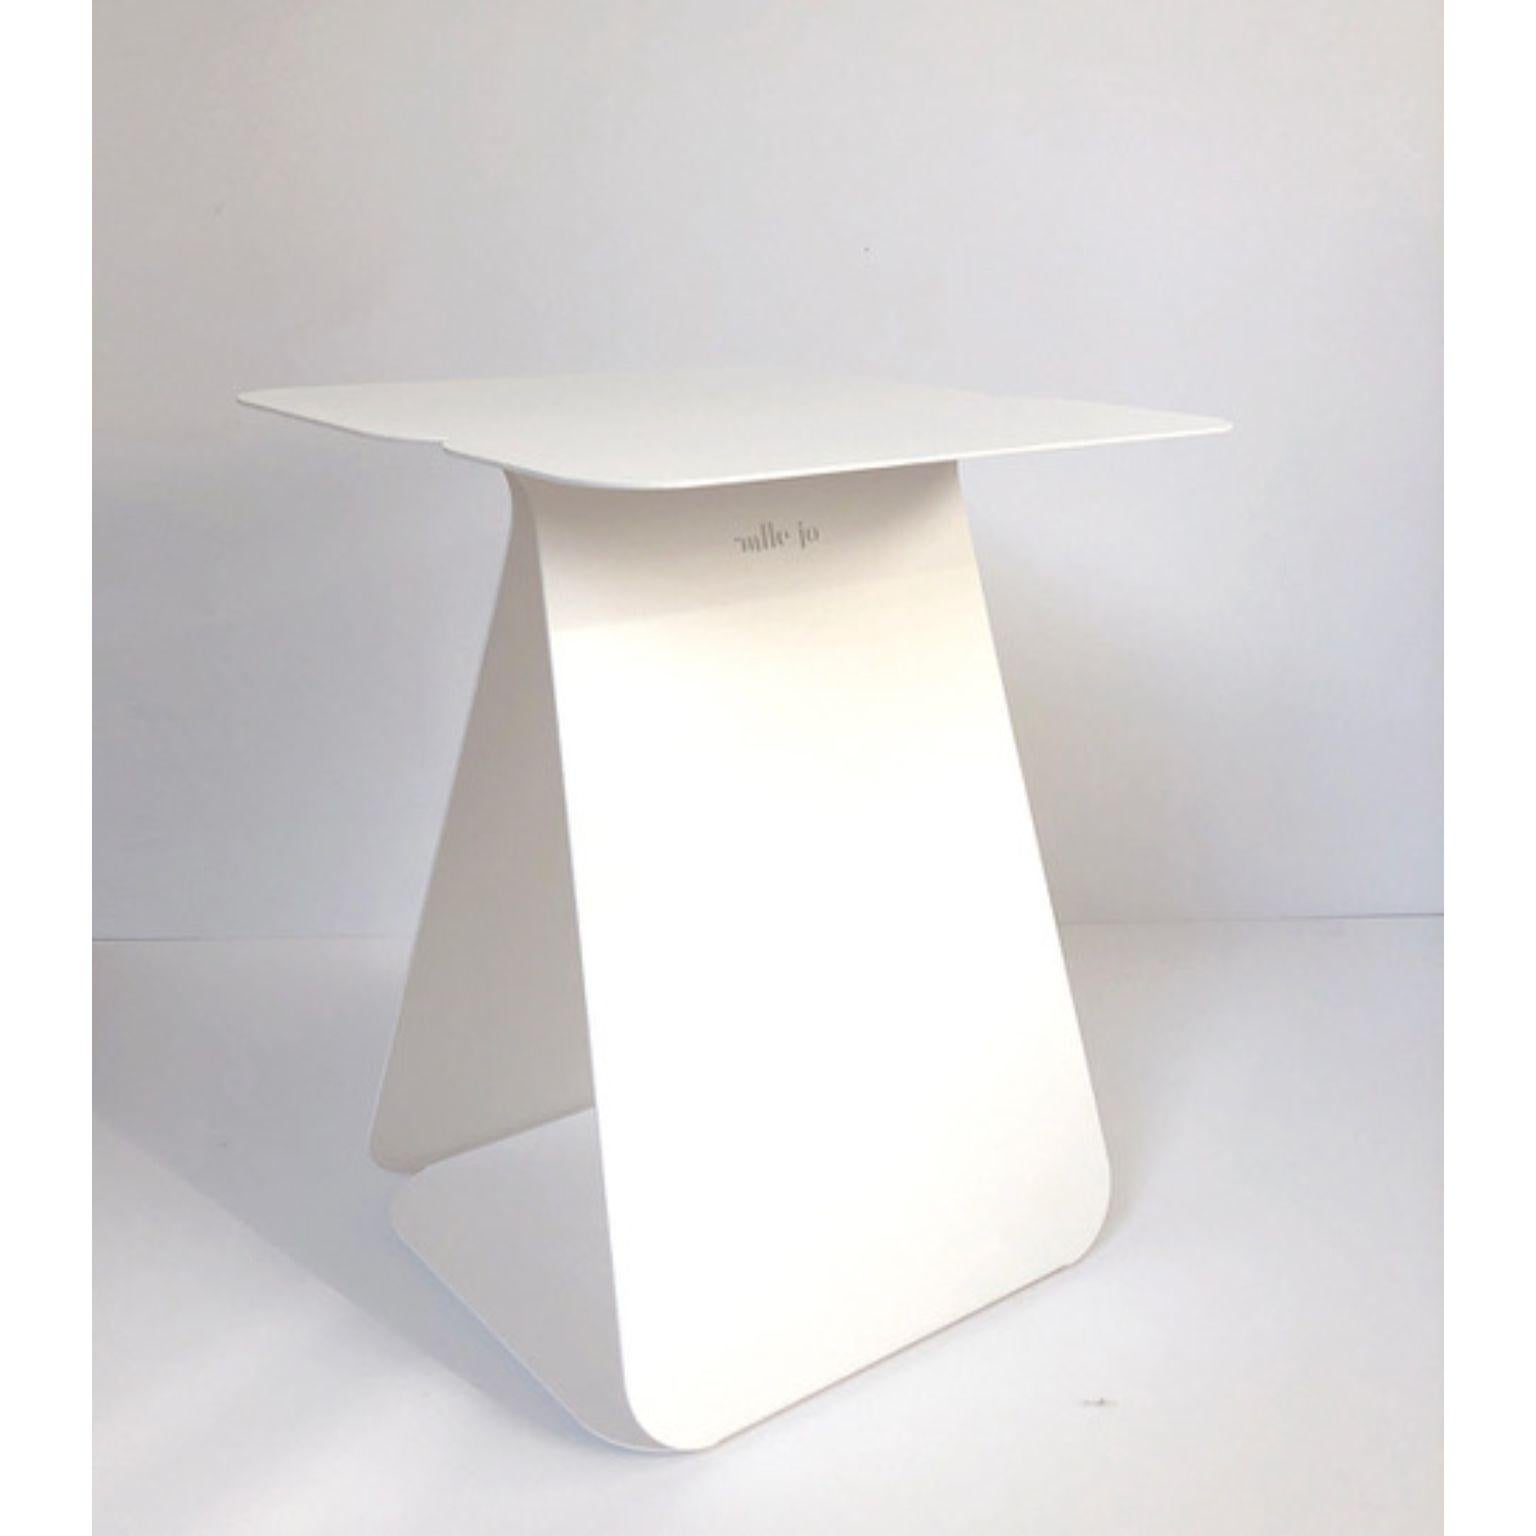 YOUMY Rectangular White Table by Mademoiselle Jo
Dimensions: D 33 x W 34 x H 43 cm.
Materials: Matte white steel.

Also available in different colors and finishes. Round symmetrical or rectangular asymmetrical version. Available in two versions and